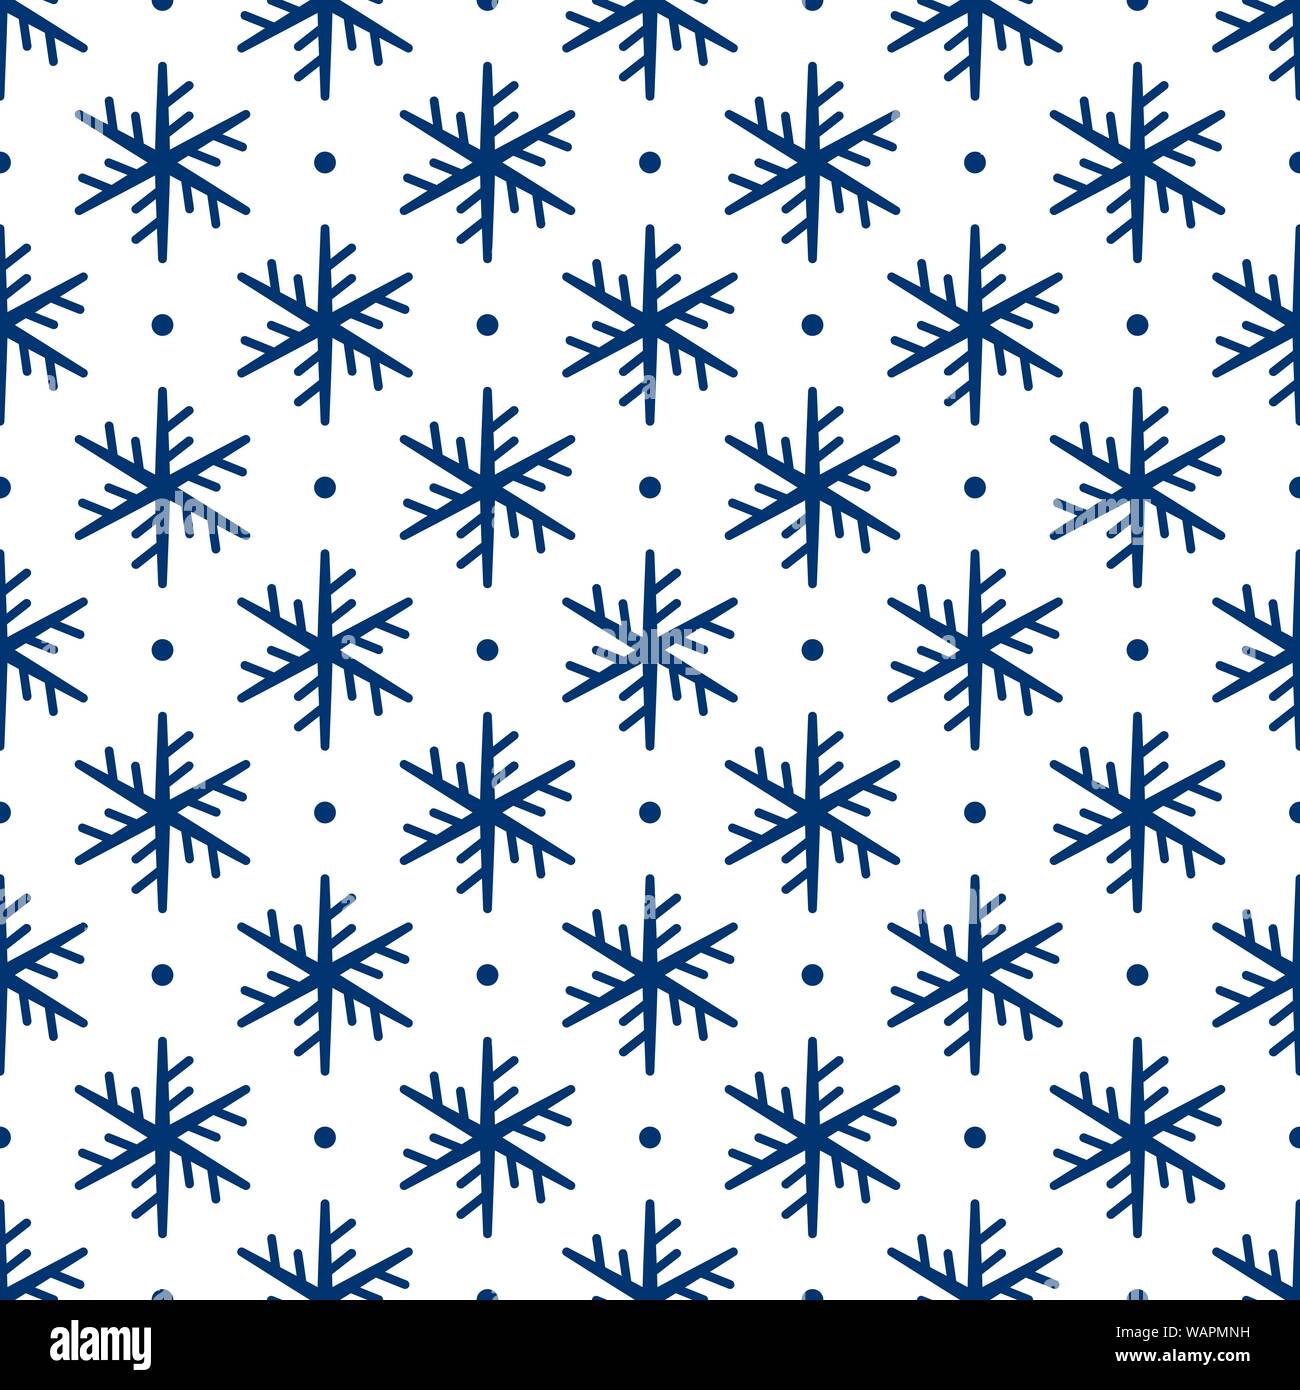 Blue snowflakes on white background, vector illustration Stock Vector